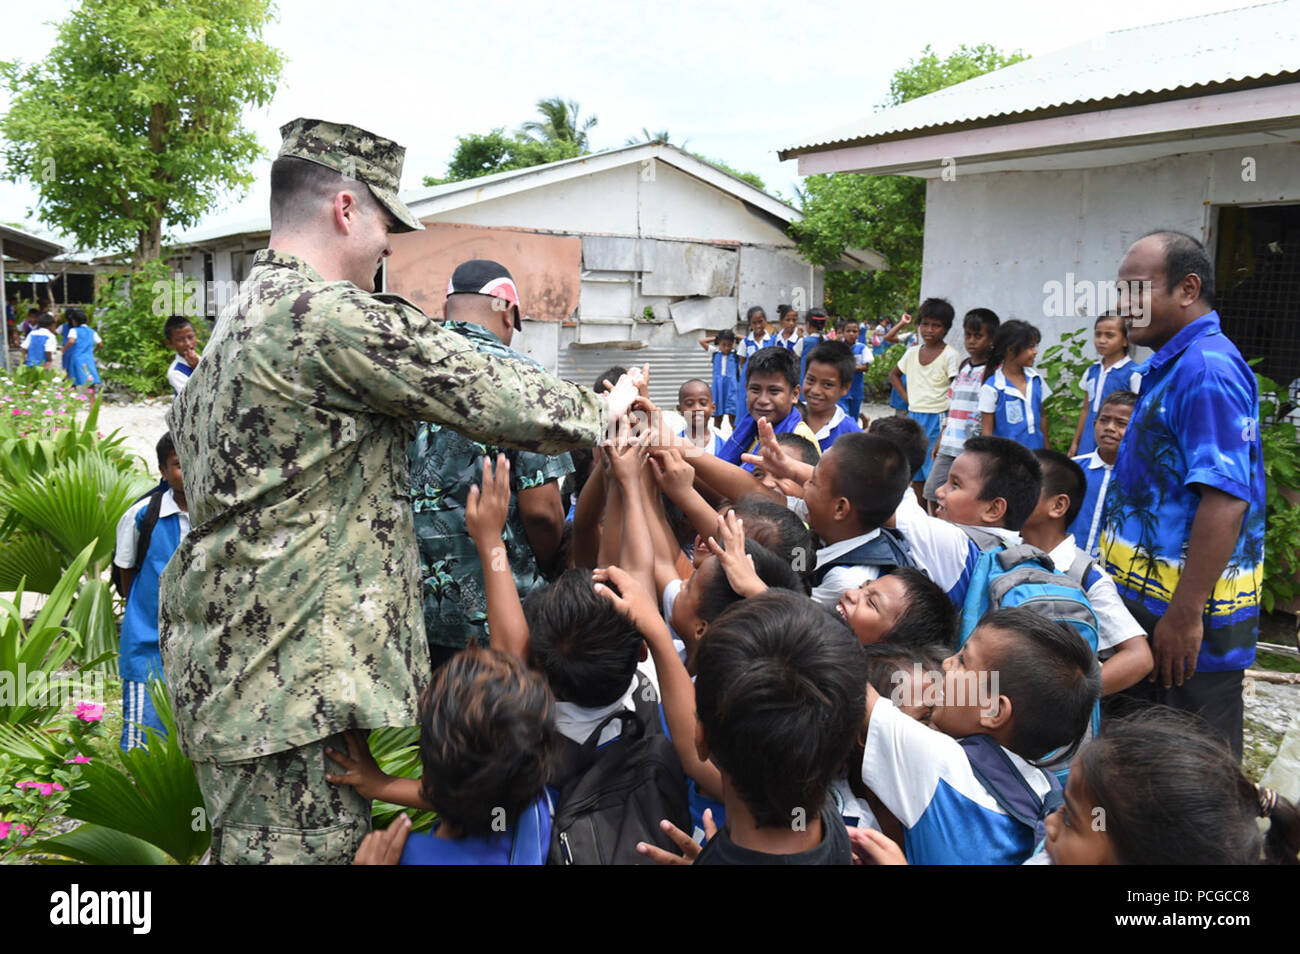 TARAWA, Kiribati (May 19, 2015) Advanced party engineer Lt. j.g. William Lindahl high fives students at the Bikenibeu West Primary School while surveying a future construction site for Pacific Partnership 2015. Pacific Partnership is in its 10th iteration and is the largest annual multilateral humanitarian assistance and disaster relief preparedness mission conducted in the Indo-Asia-Pacific region. While training for crisis conditions, Pacific Partnership missions to date have provided real-world medical care to approximately 270,000 patients and veterinary services to more than 38,000 animal Stock Photo